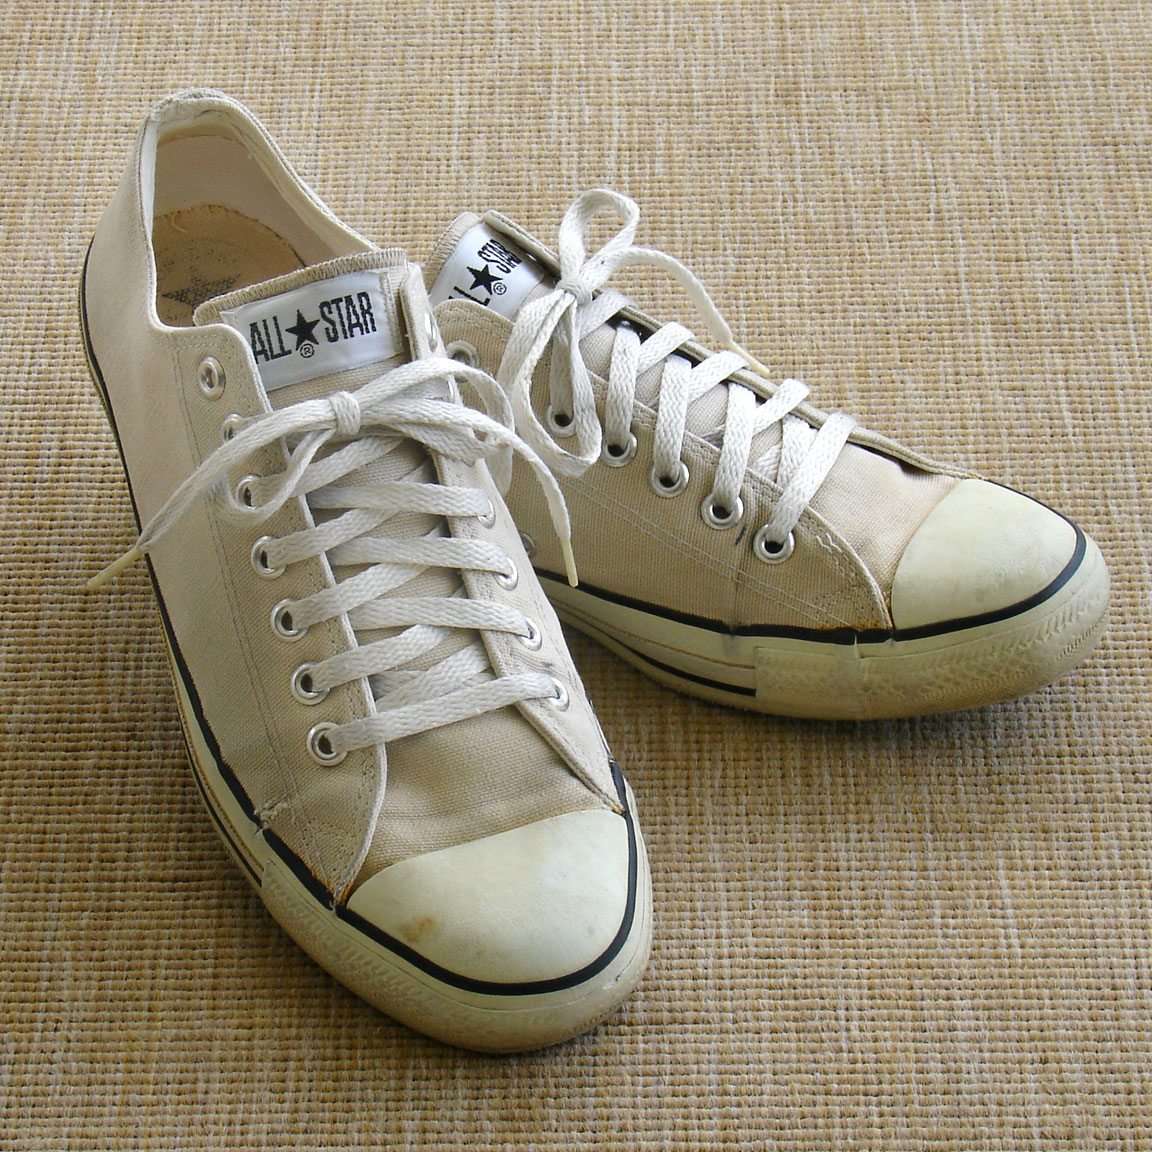 Vintage American-made khaki/tan Converse All Star Chuck Taylor shoes for sale at http://www.collectornet.net/shoes